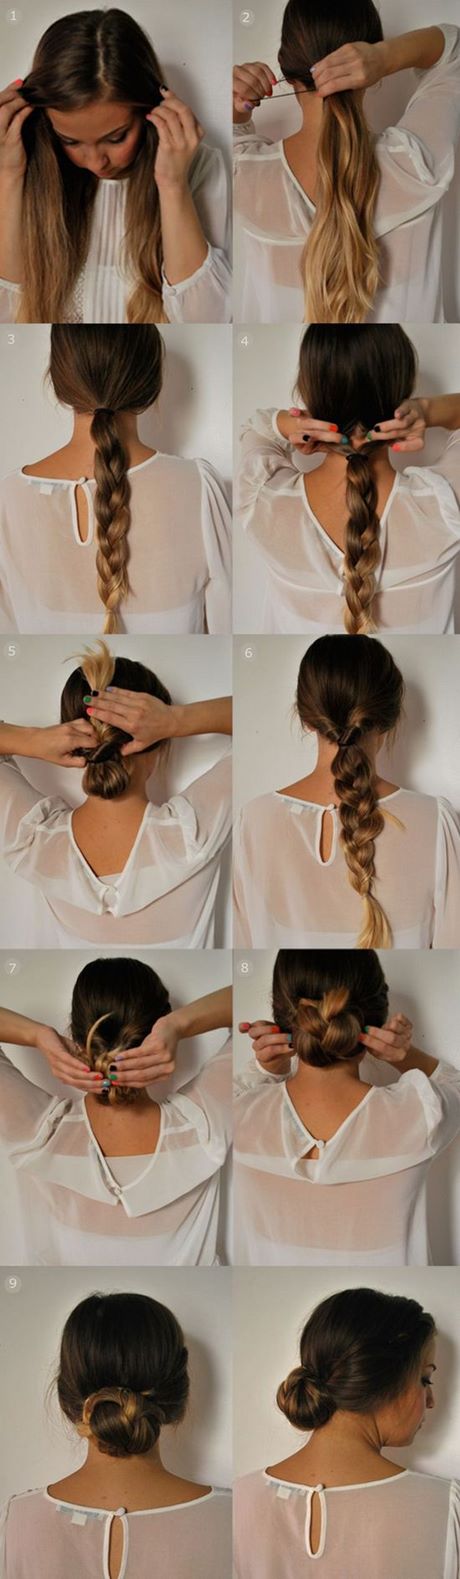 very-simple-hairstyles-for-girls-45_2 Very simple hairstyles for girls